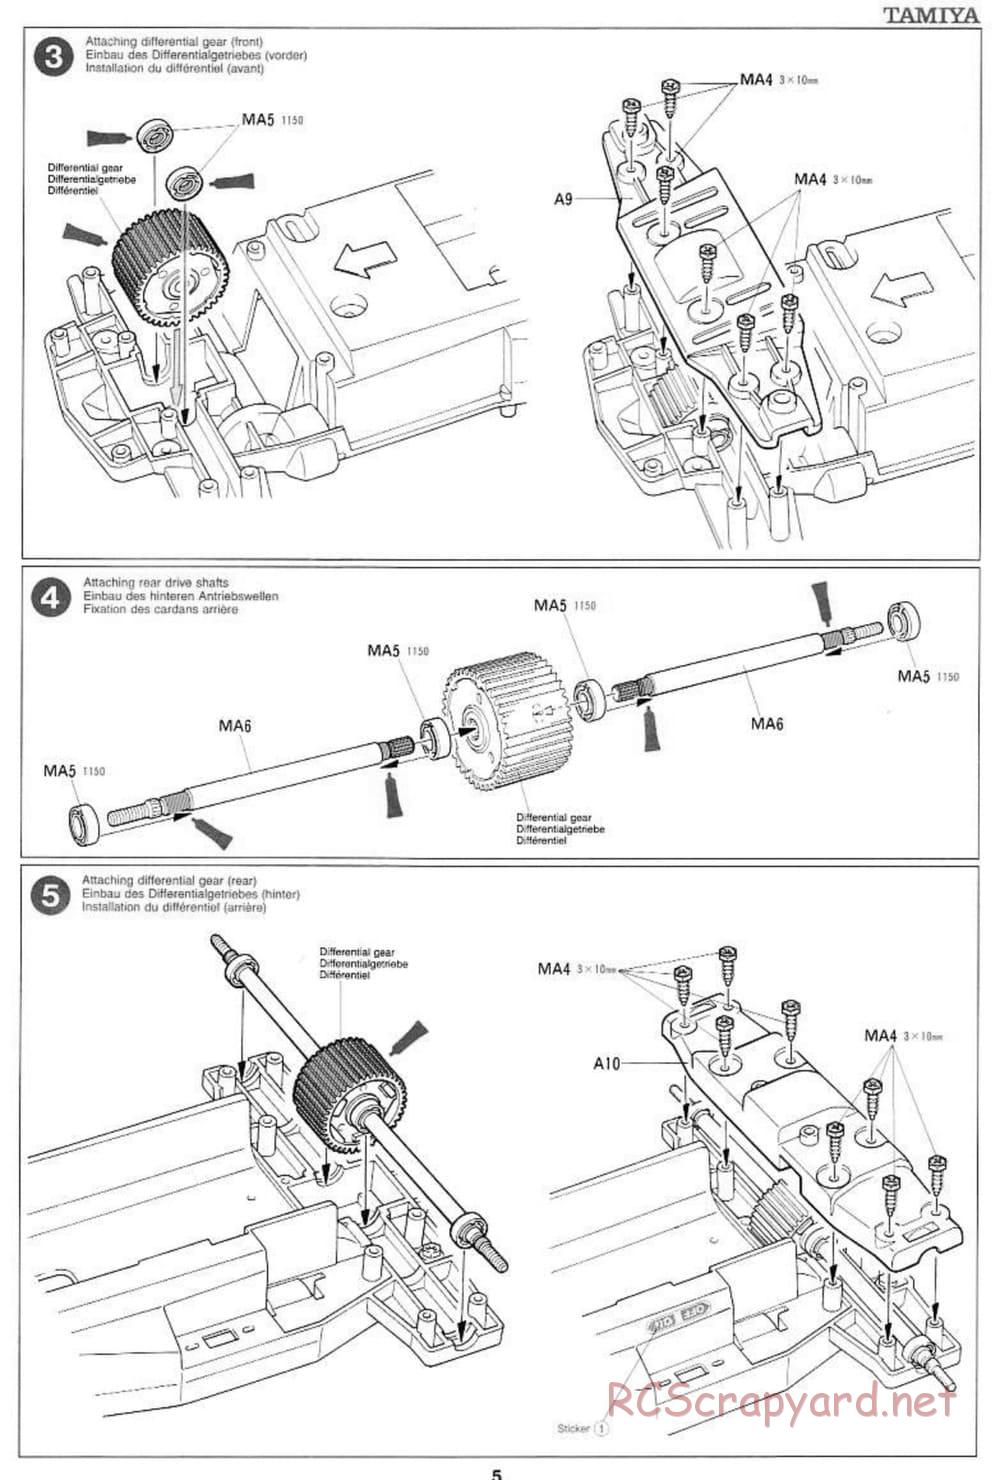 Tamiya - Wild Ceptor - Boy's 4WD Chassis - Manual - Page 5